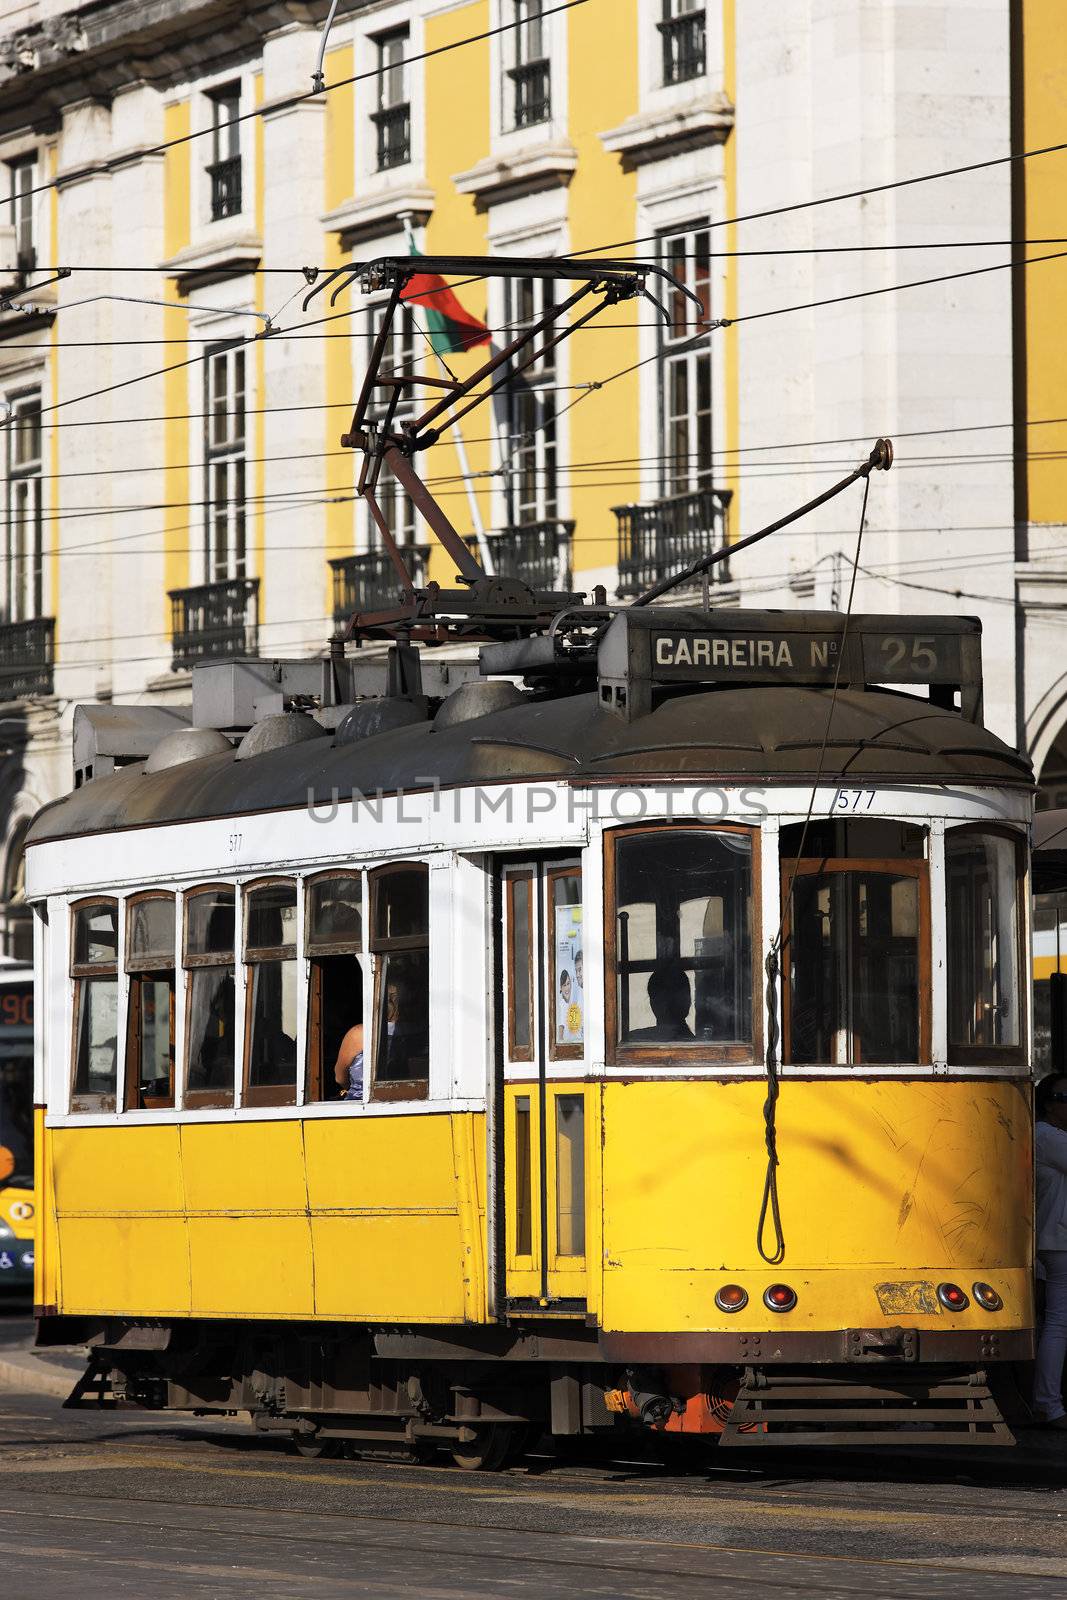 a Typical Tram in old street, Lisbon, Portugal 